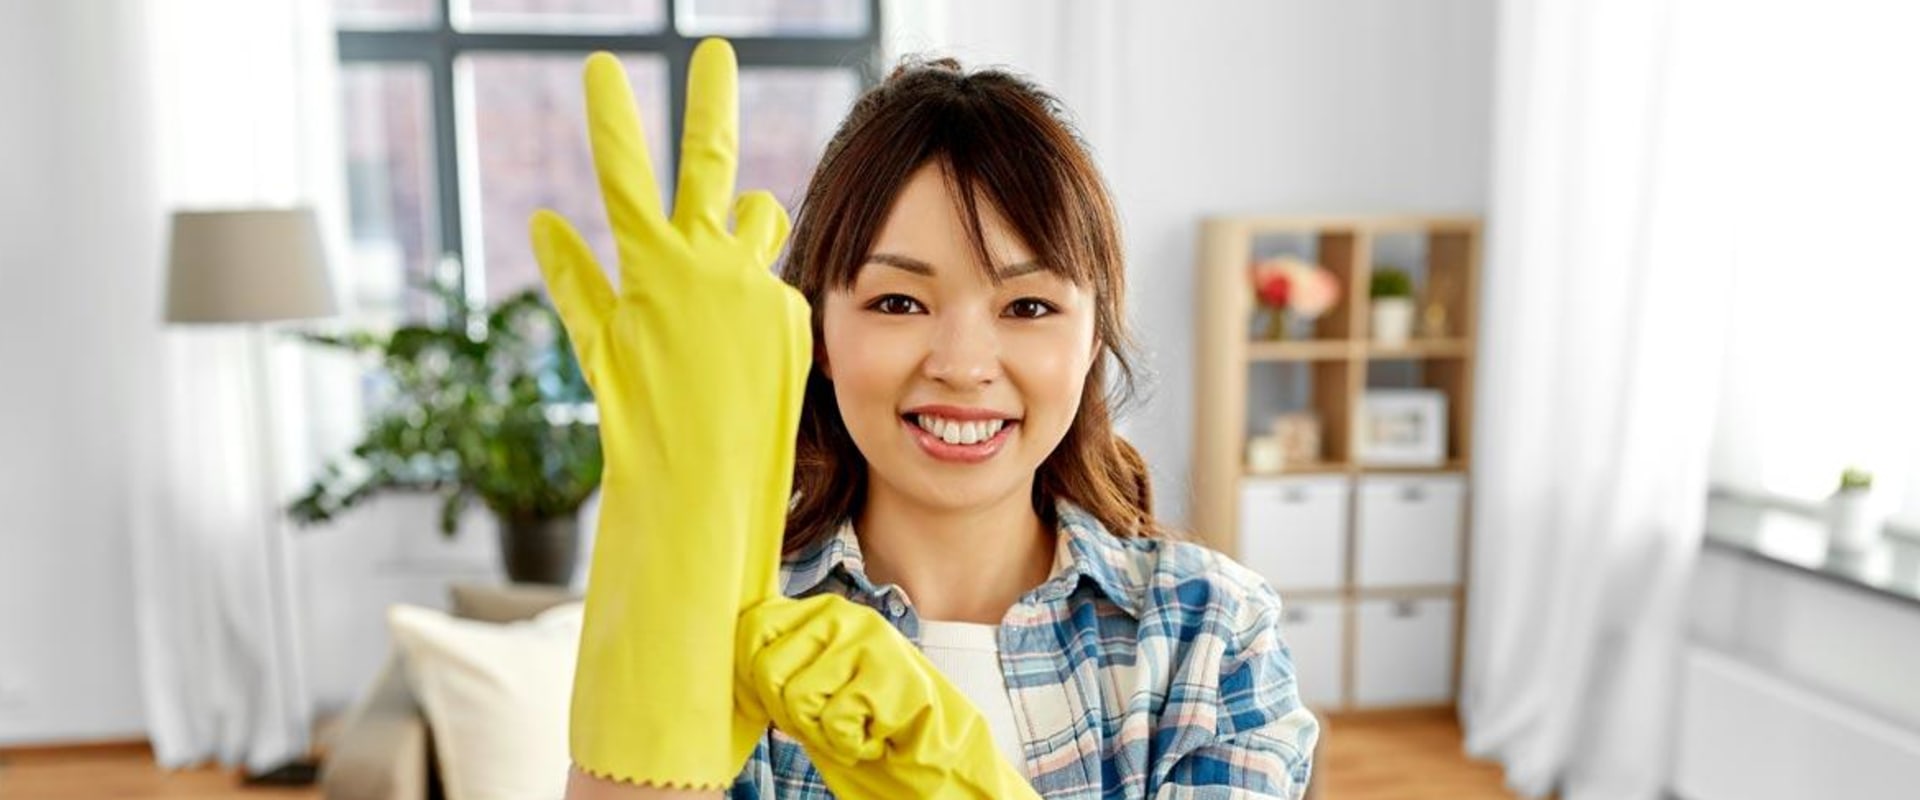 What are the respiratory health benefits of regular house cleaning?